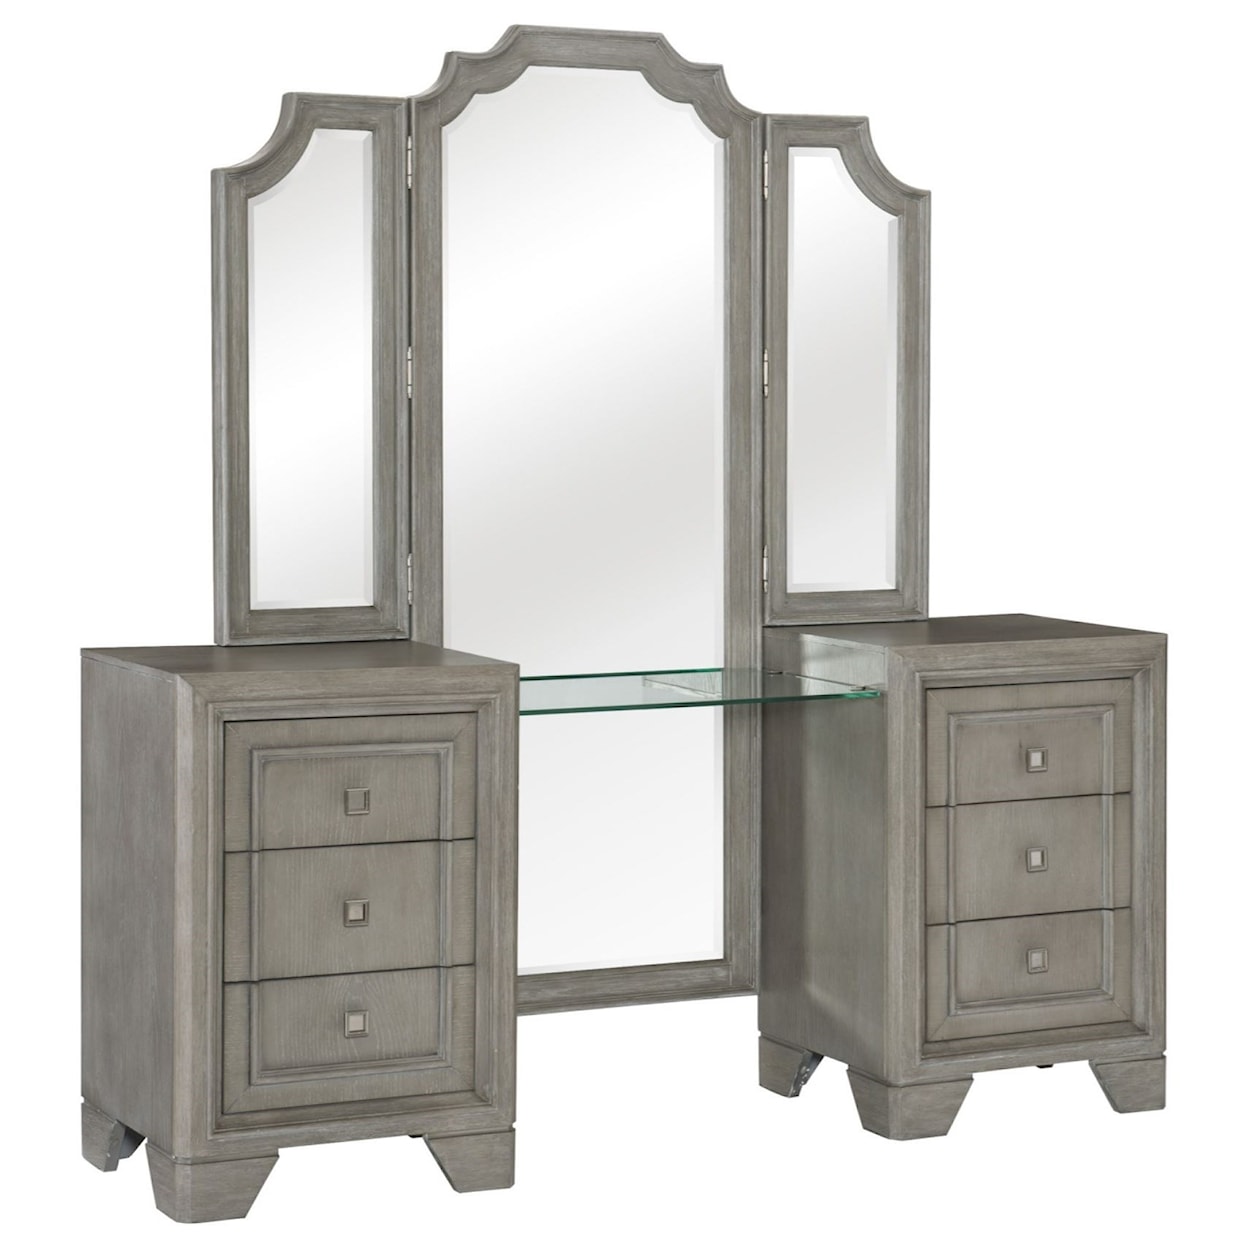 Homelegance Furniture Colchester Vanity Dress with Mirror